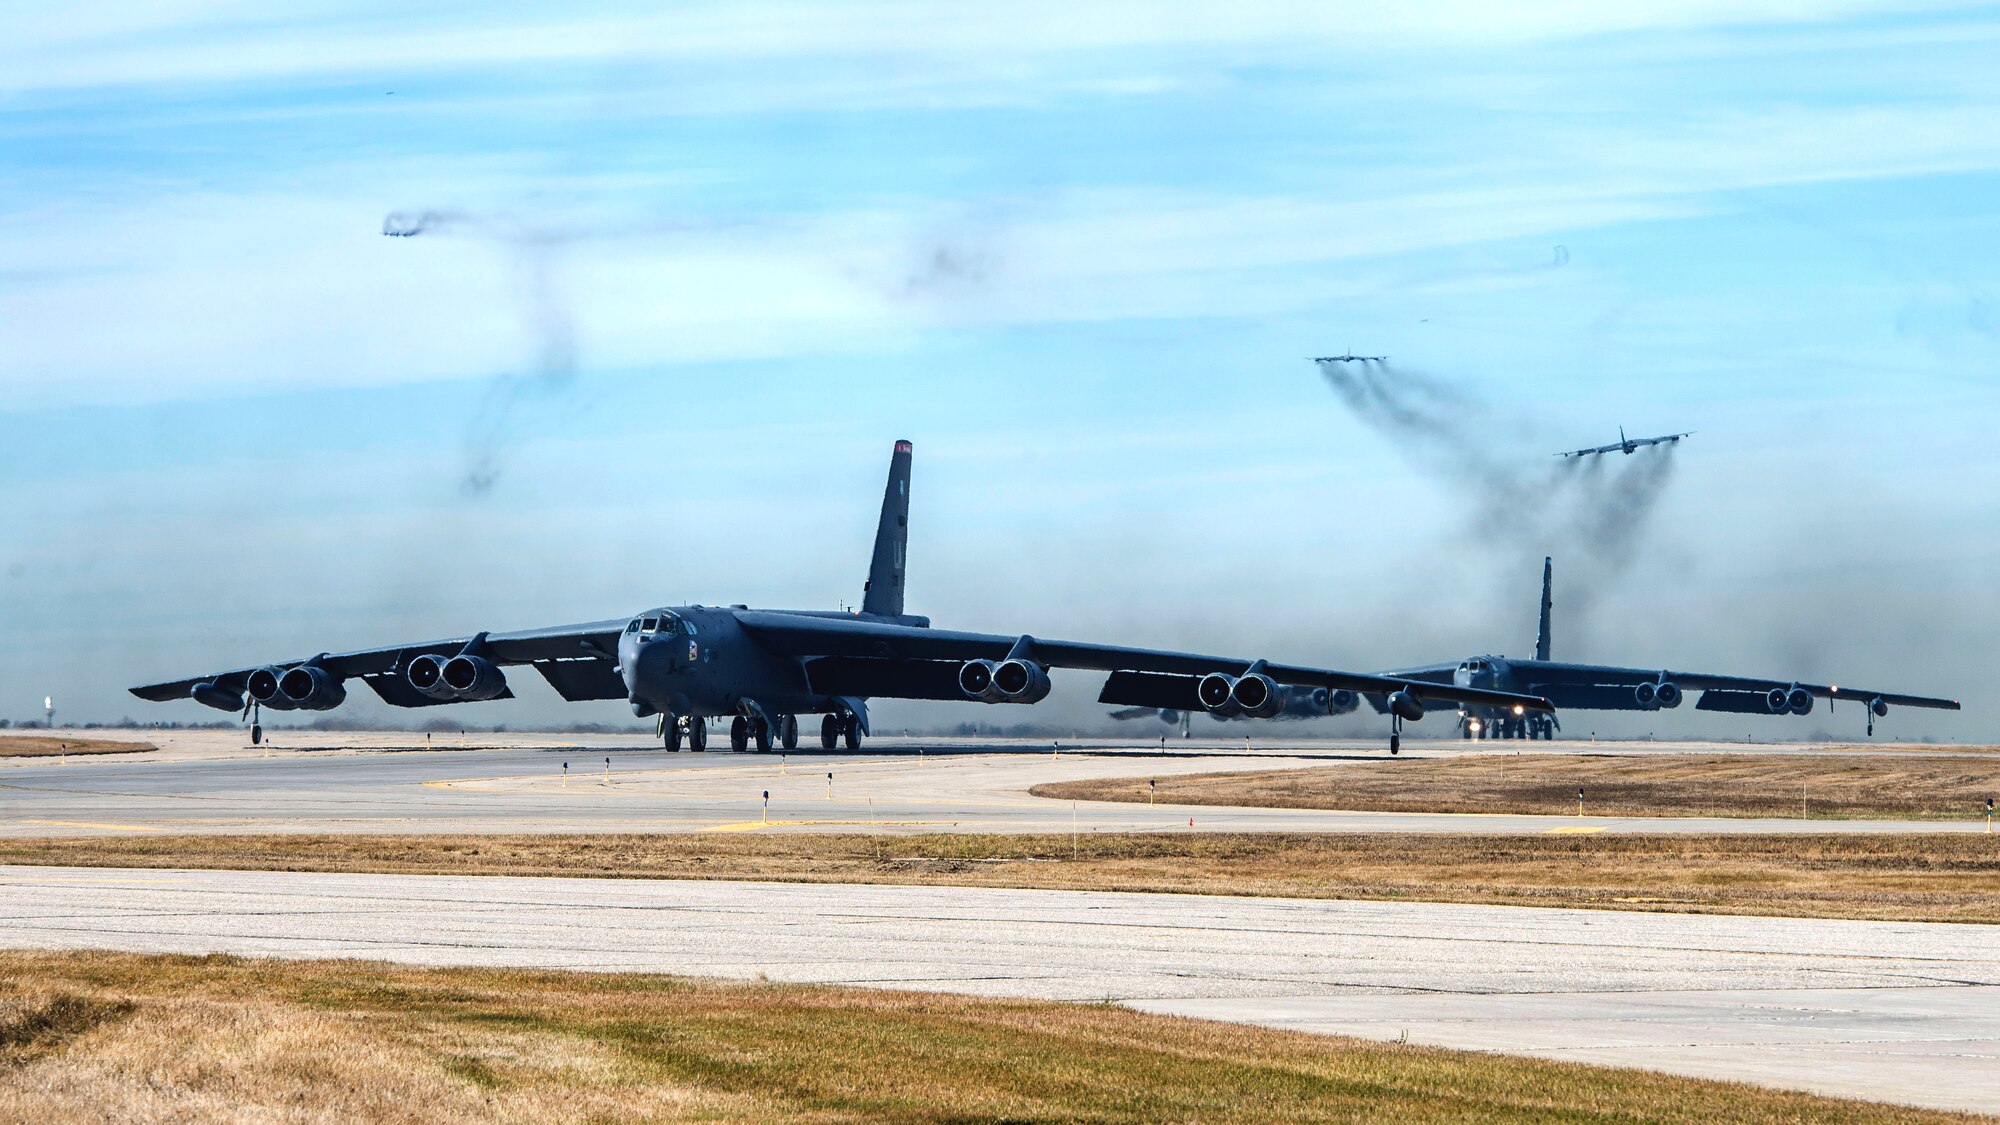 Two B-52 Stratofortress bombers assigned to Air Force Global Strike Command (AFGSC) taxi while three others take off from the flight line at Minot Air Force Base, N.D., Nov. 8, 2015, during Exercise GLOBAL THUNDER 16. AFGSC supports USSTRATCOM’s global strike and nuclear deterrence missions by providing strategic assets, including bombers like the B-52 and B-2, to ensure a safe, secure, effective and ready deterrent force. GLOBAL THUNDER is an annual U.S. Strategic Command training event that assesses command and control functionality in all USSTRATCOM mission areas and affords component commands a venue to evaluate their joint operational readiness. Planning for GLOBAL THUNDER 16 has been underway for more than a year and is based on a notional scenario with fictitious adversaries. One of nine DoD unified combatant commands, USSTRATCOM has global strategic missions, assigned through the Unified Command Plan, which also include; space operations; cyberspace operations; joint electronic warfare; missile defense; intelligence, surveillance and reconnaissance; combating weapons of mass destruction; and analysis and targeting. (U.S. Air Force photo by Airman 1st Class Justin Armstong)